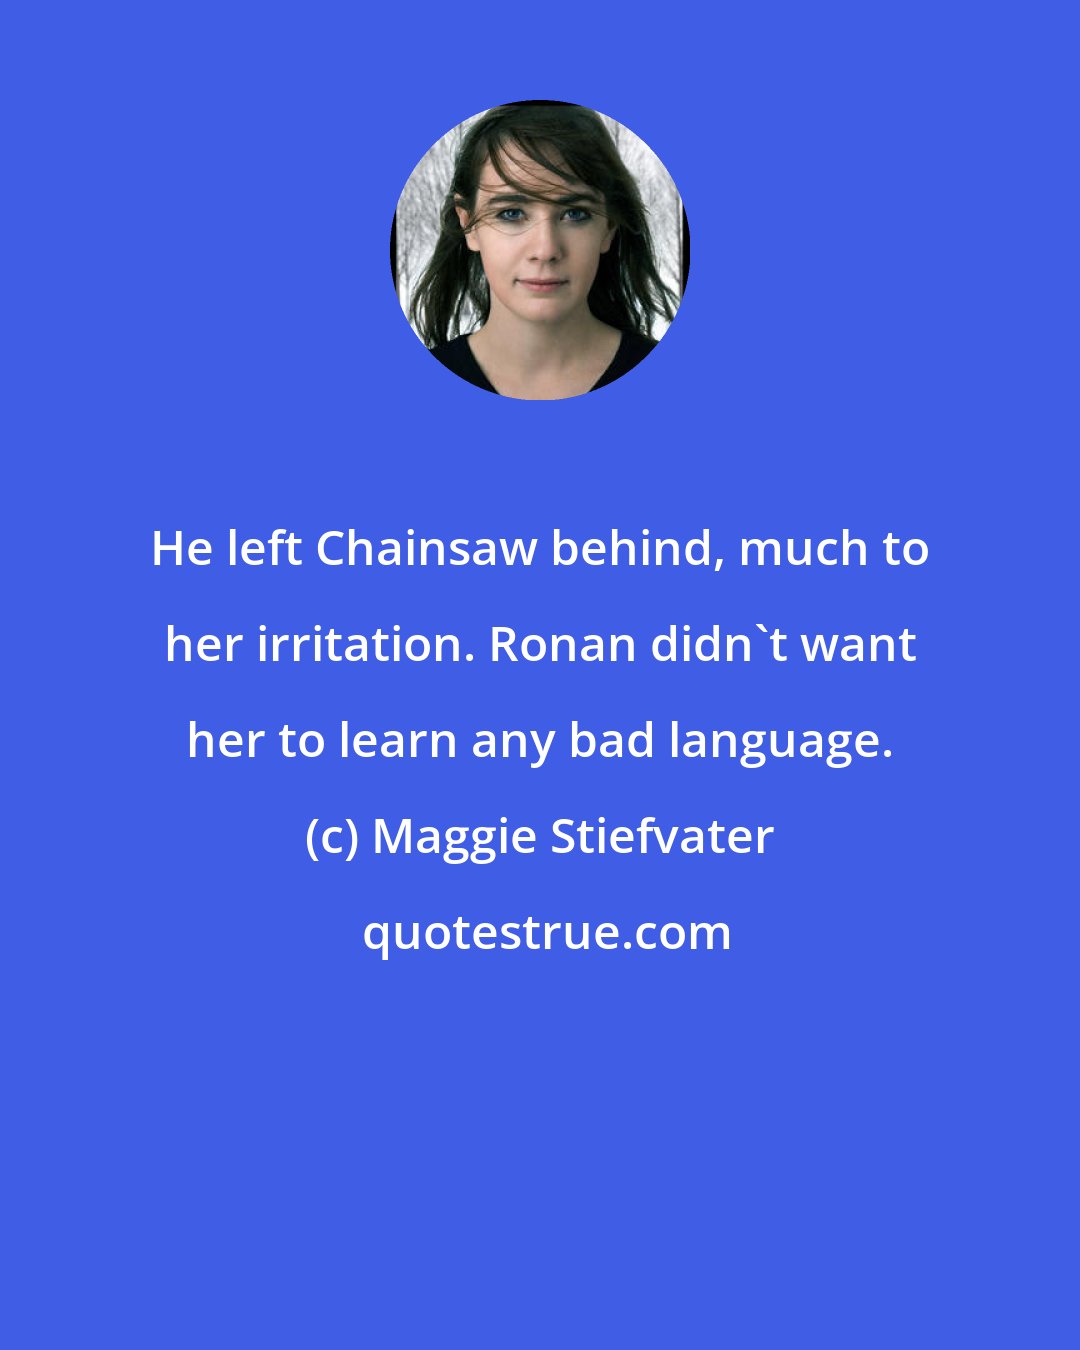 Maggie Stiefvater: He left Chainsaw behind, much to her irritation. Ronan didn't want her to learn any bad language.